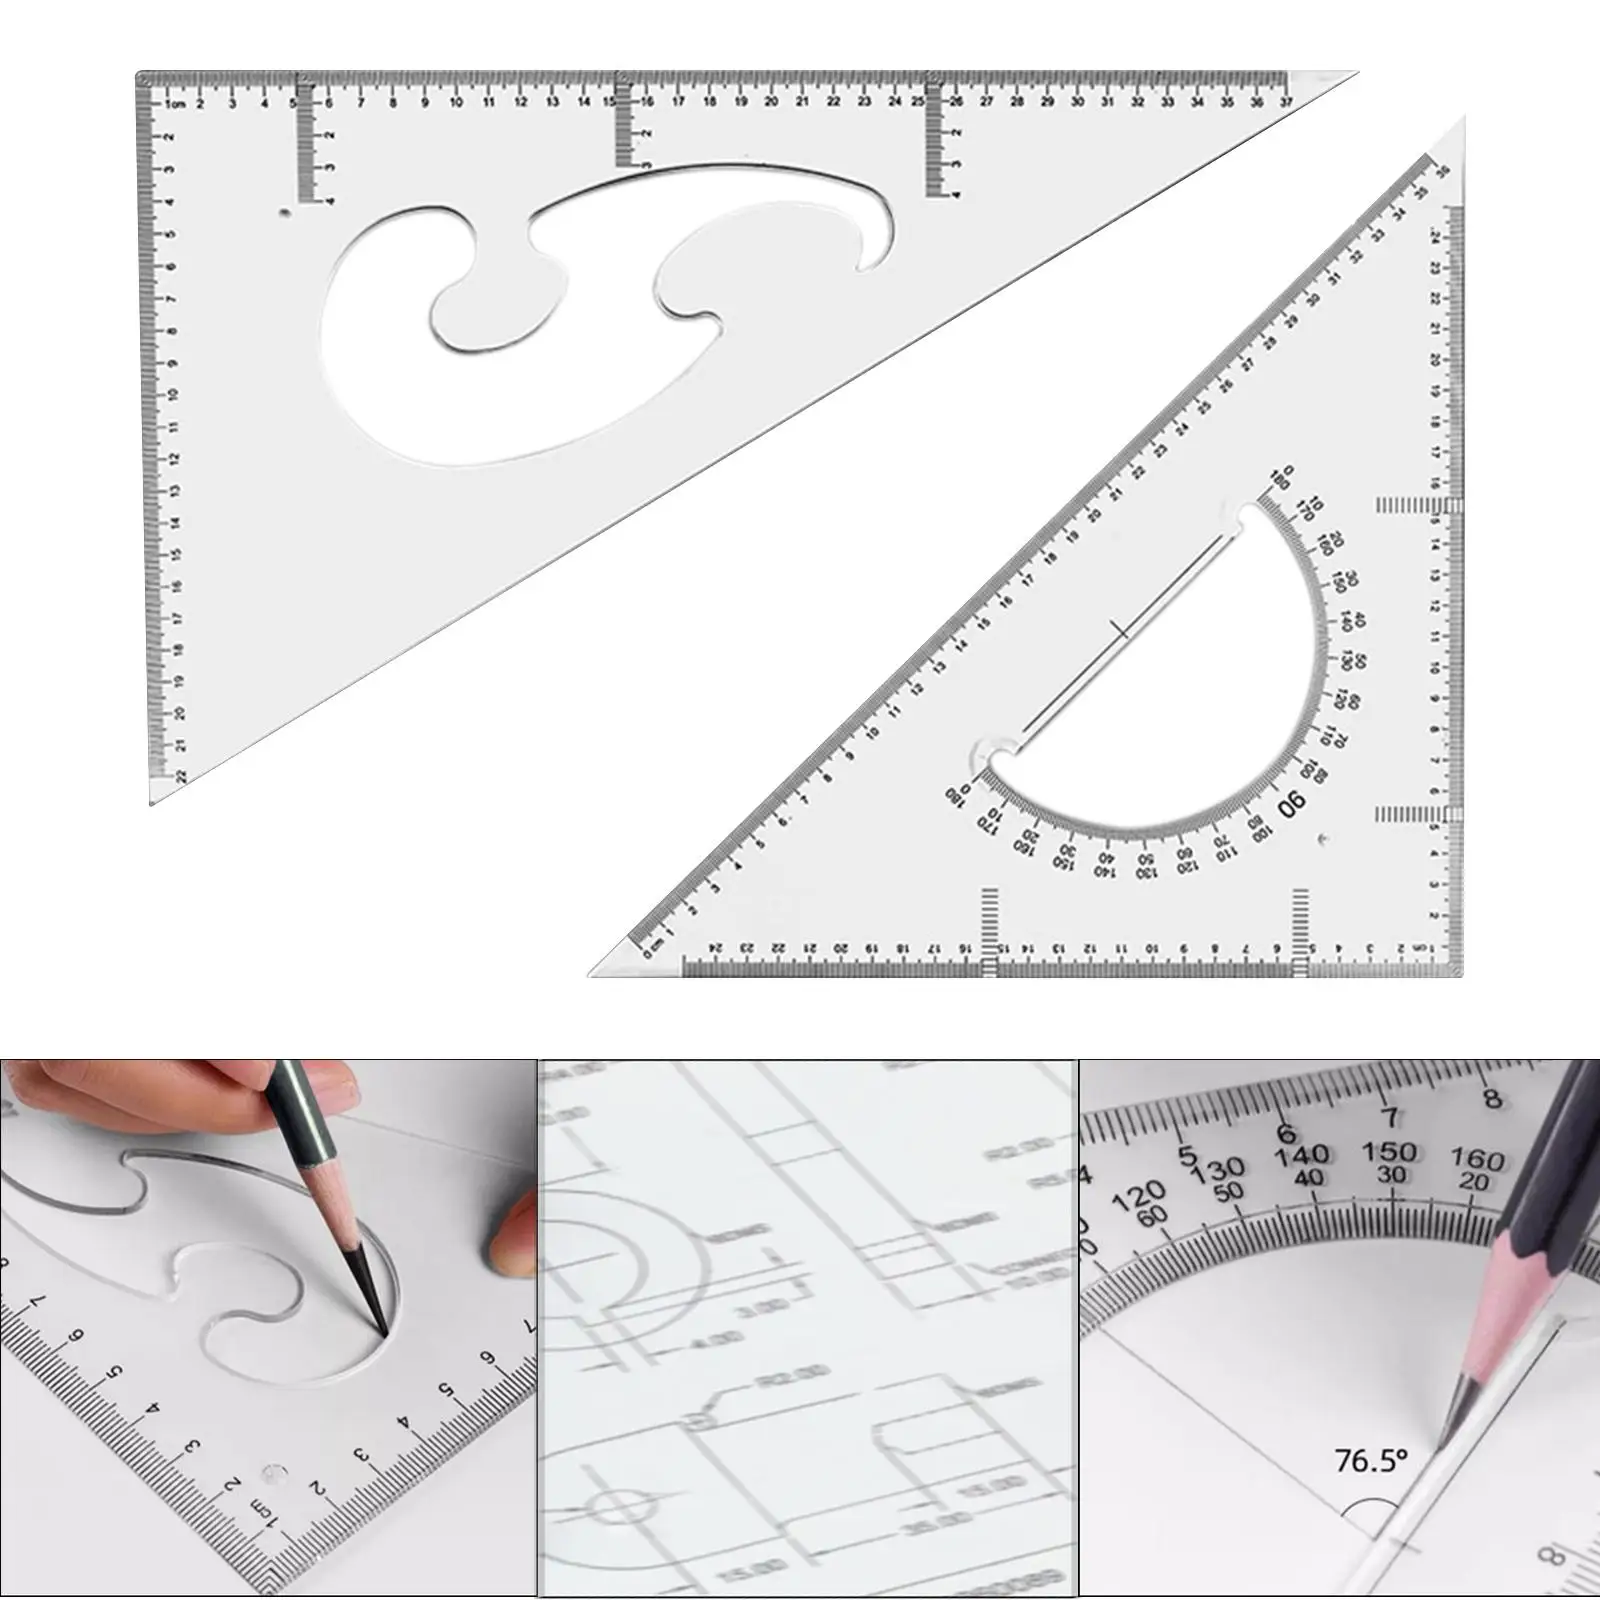 2x Triangle Ruler Square Geometry Rulers Professional Measuring Ruler Stationery for Carpentry Artists Engineer Design Teaching